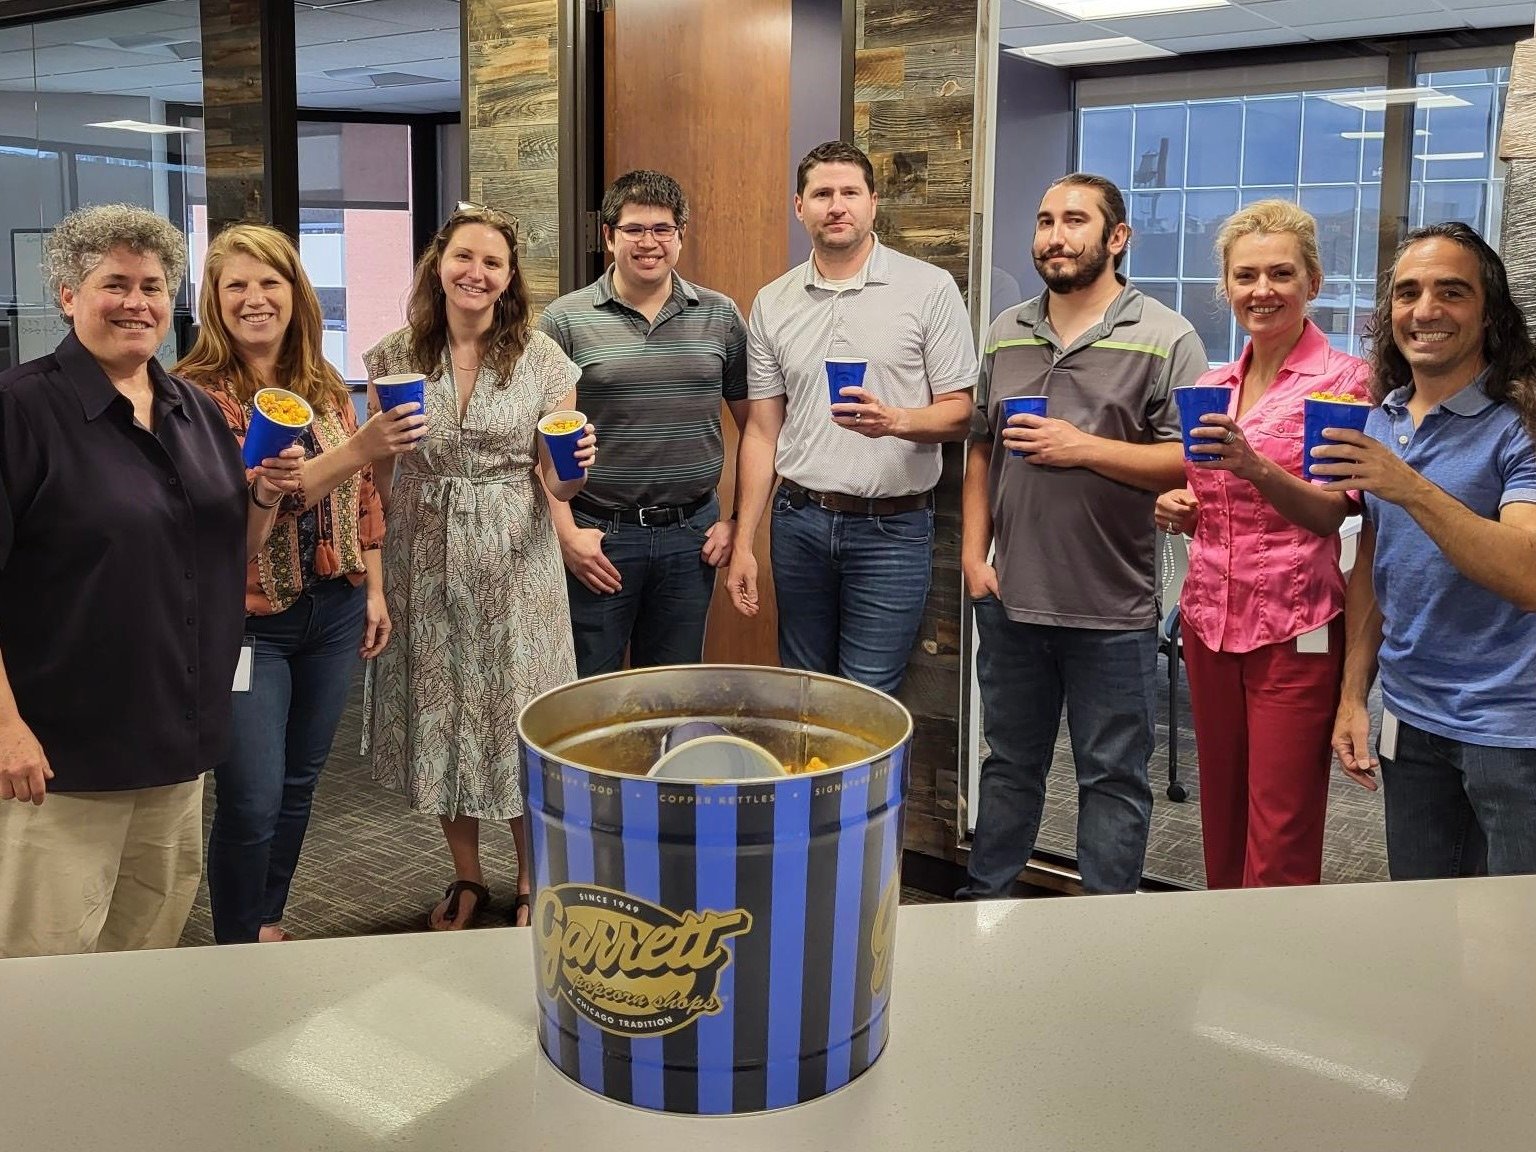 A group of Invenergy employees smile and pose in front of a half-eaten tin of Garrett brand popcorn.